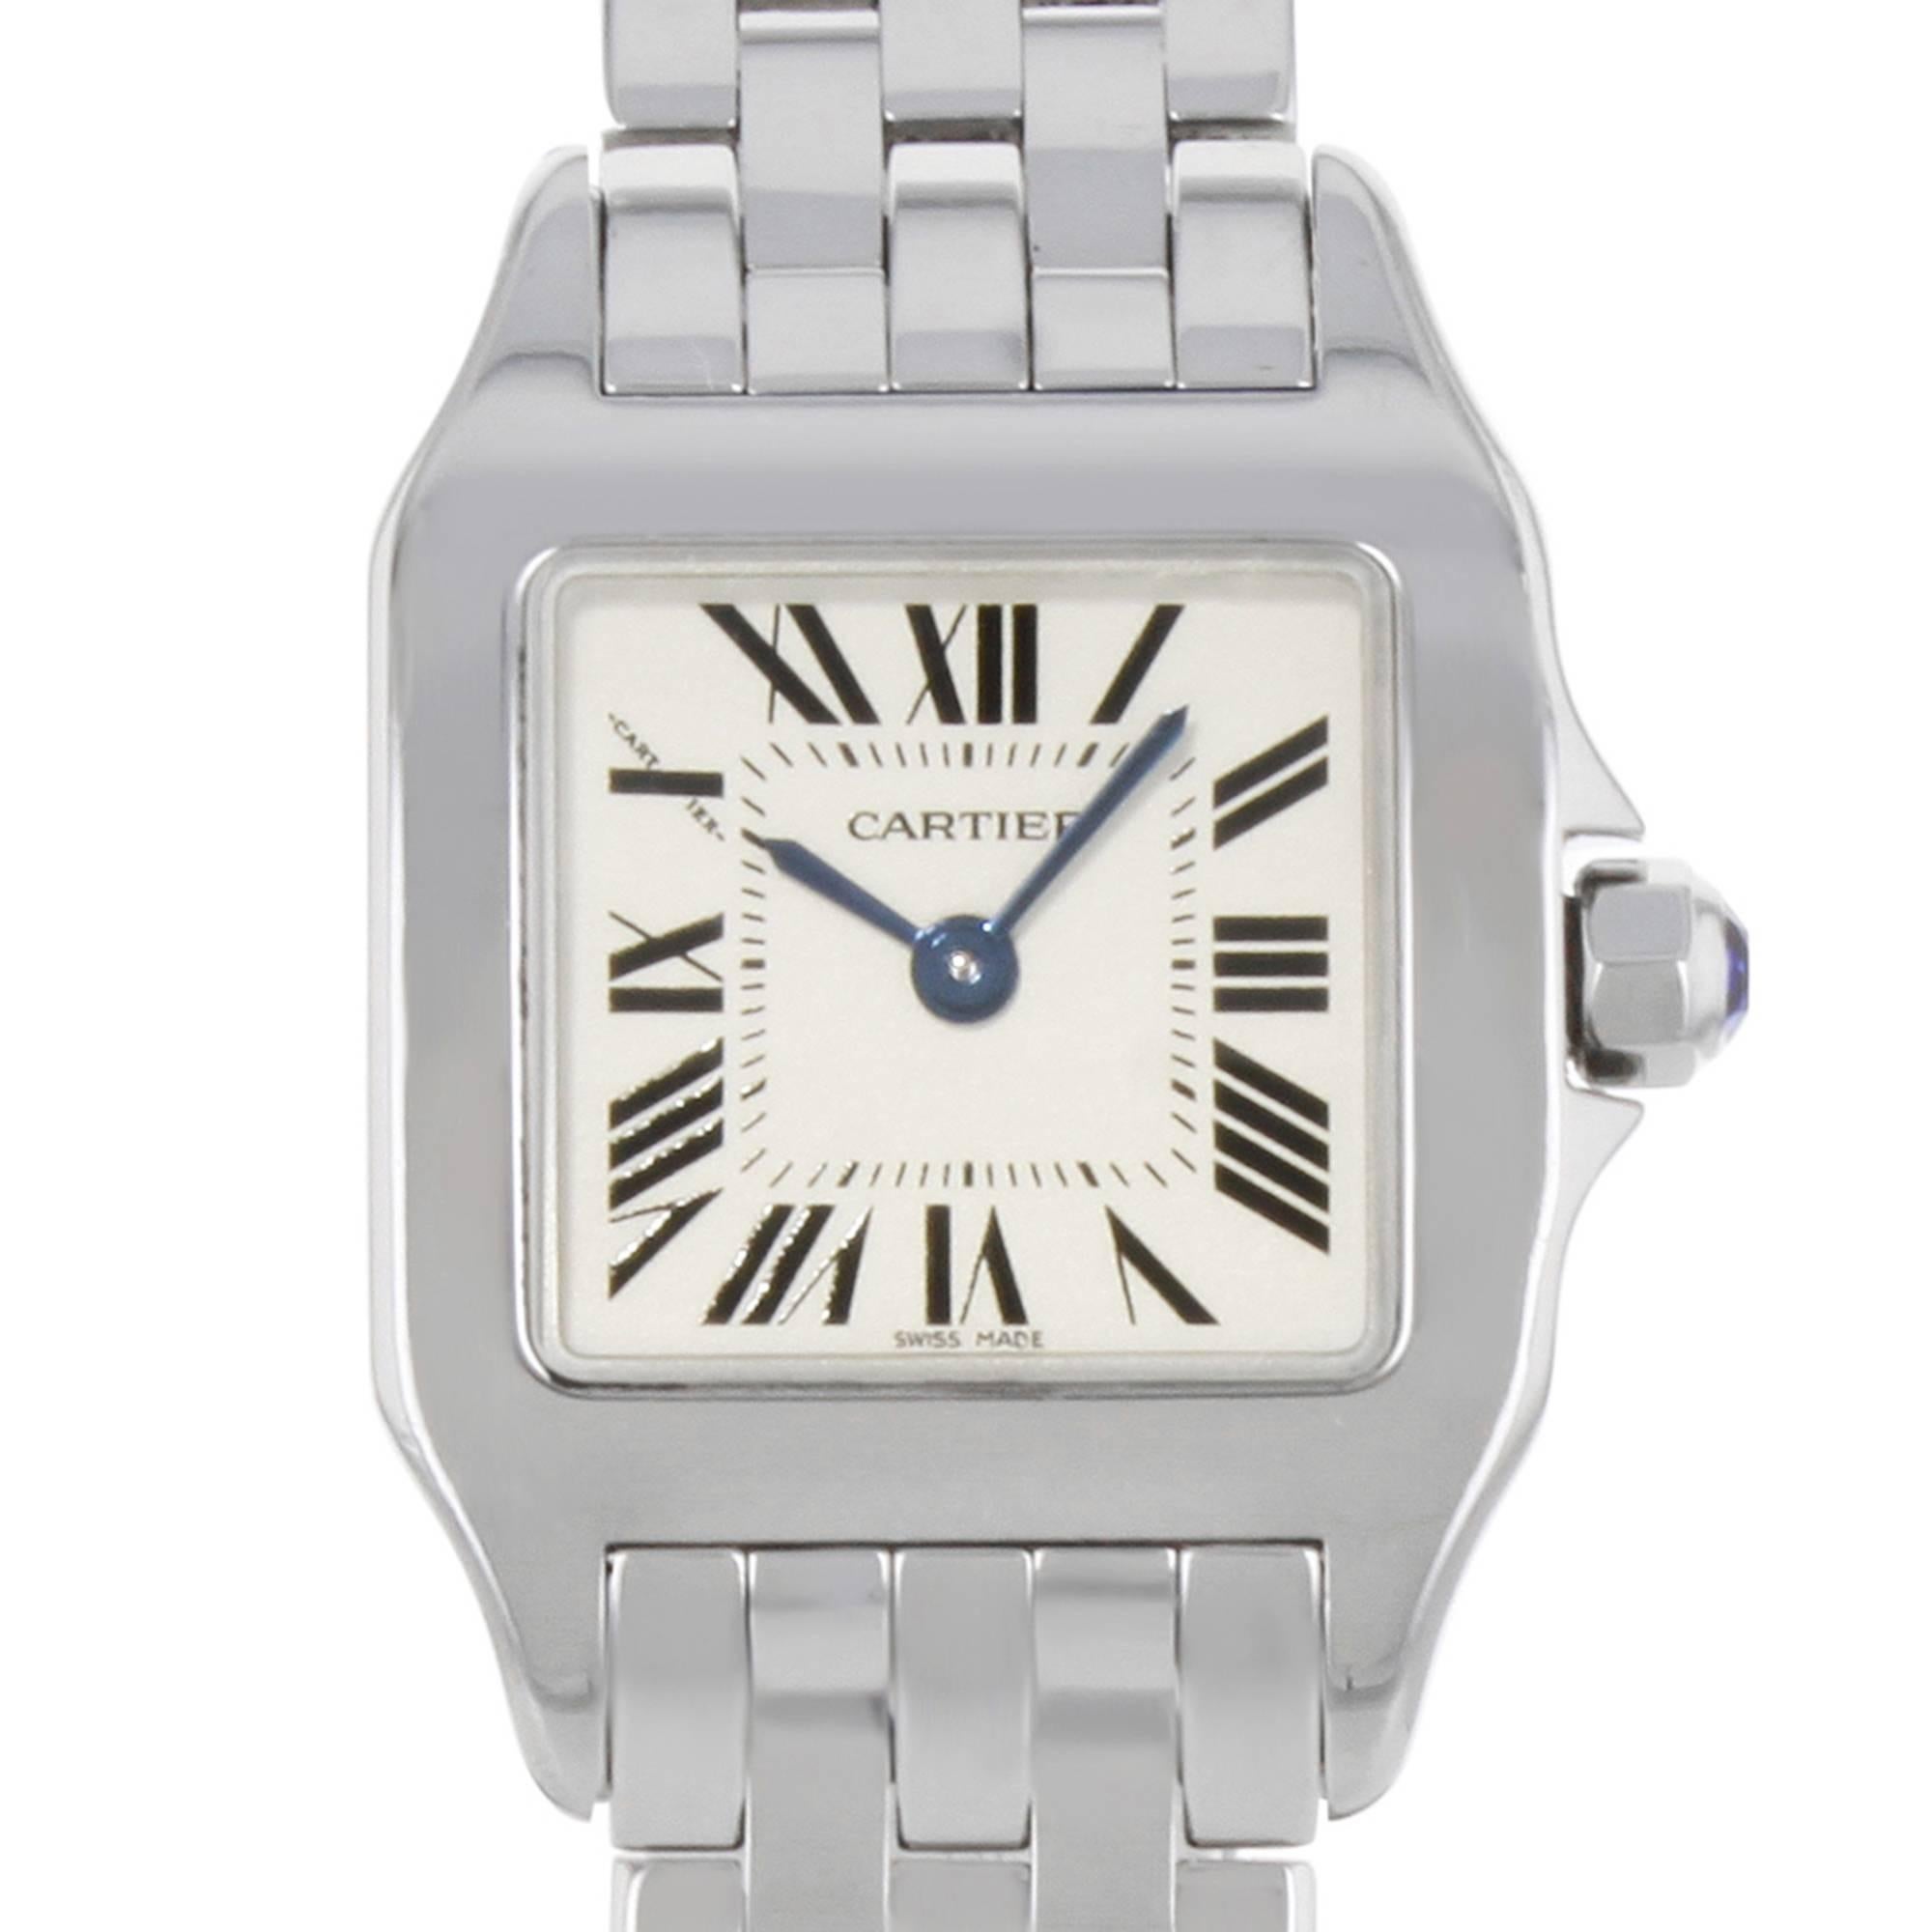 Brand: Cartier
Series: Santos 
Model Number: W25064Z5 
Case Material: Stainless Steel
Case Shape: Square
Case Diameter: 20 mm
Case Thickness: 5.5 mm
Bezel Type: Fixed
Bezel Features: 
Bezel Material: Stainless Steel
Dial Color: White
Display: